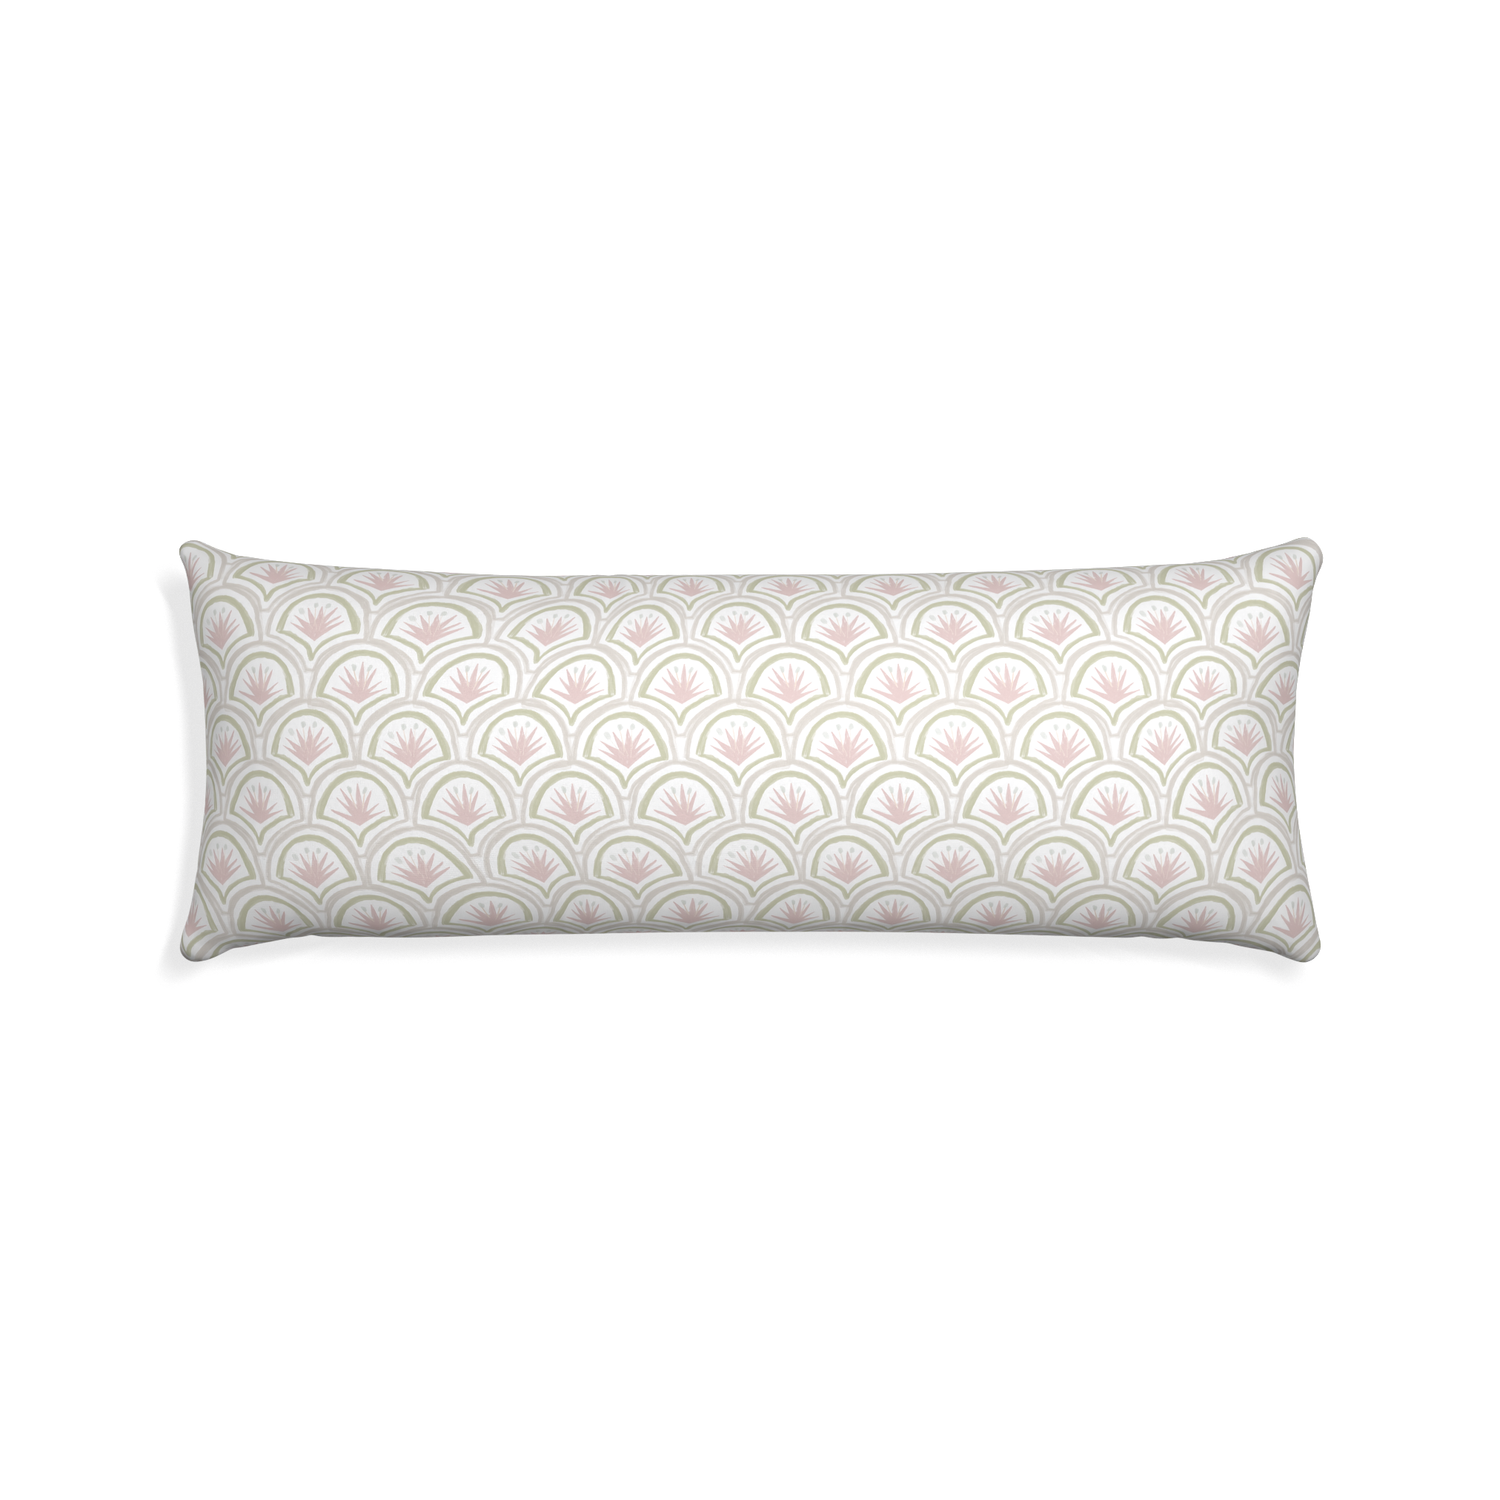 Xl-lumbar thatcher rose custom pillow with none on white background